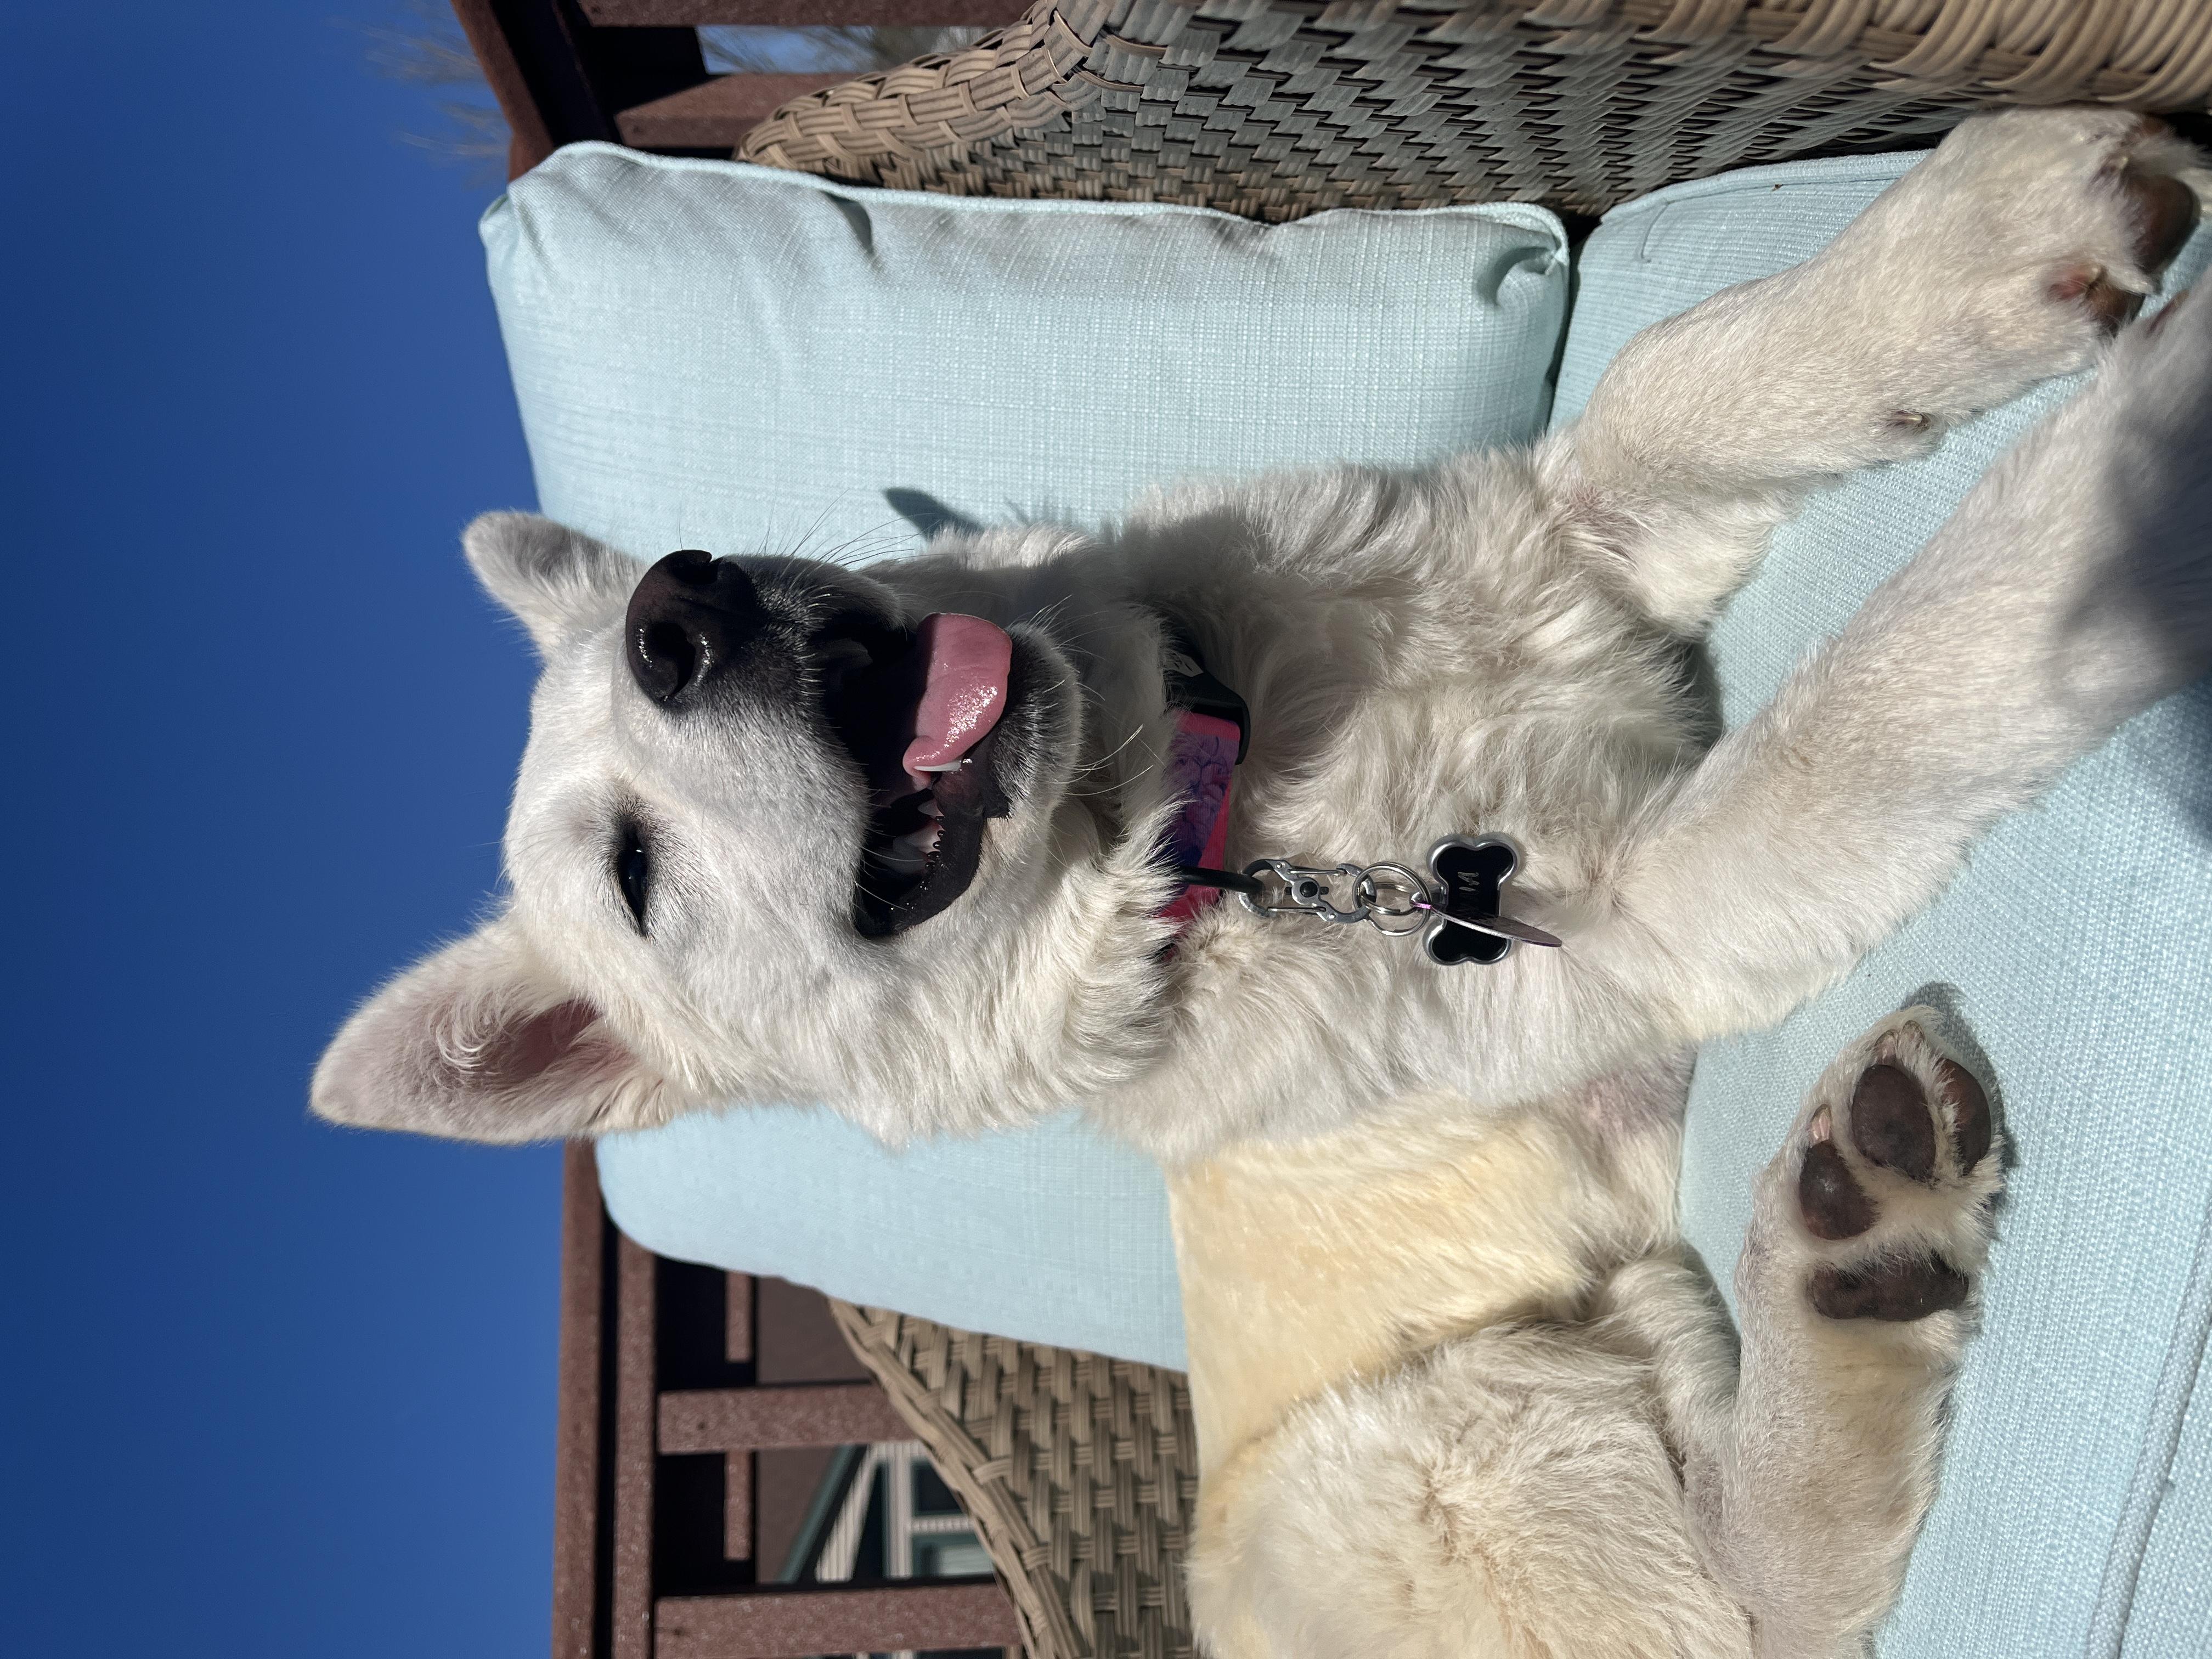 A white dog smiles while sitting on a light blue lawn chair